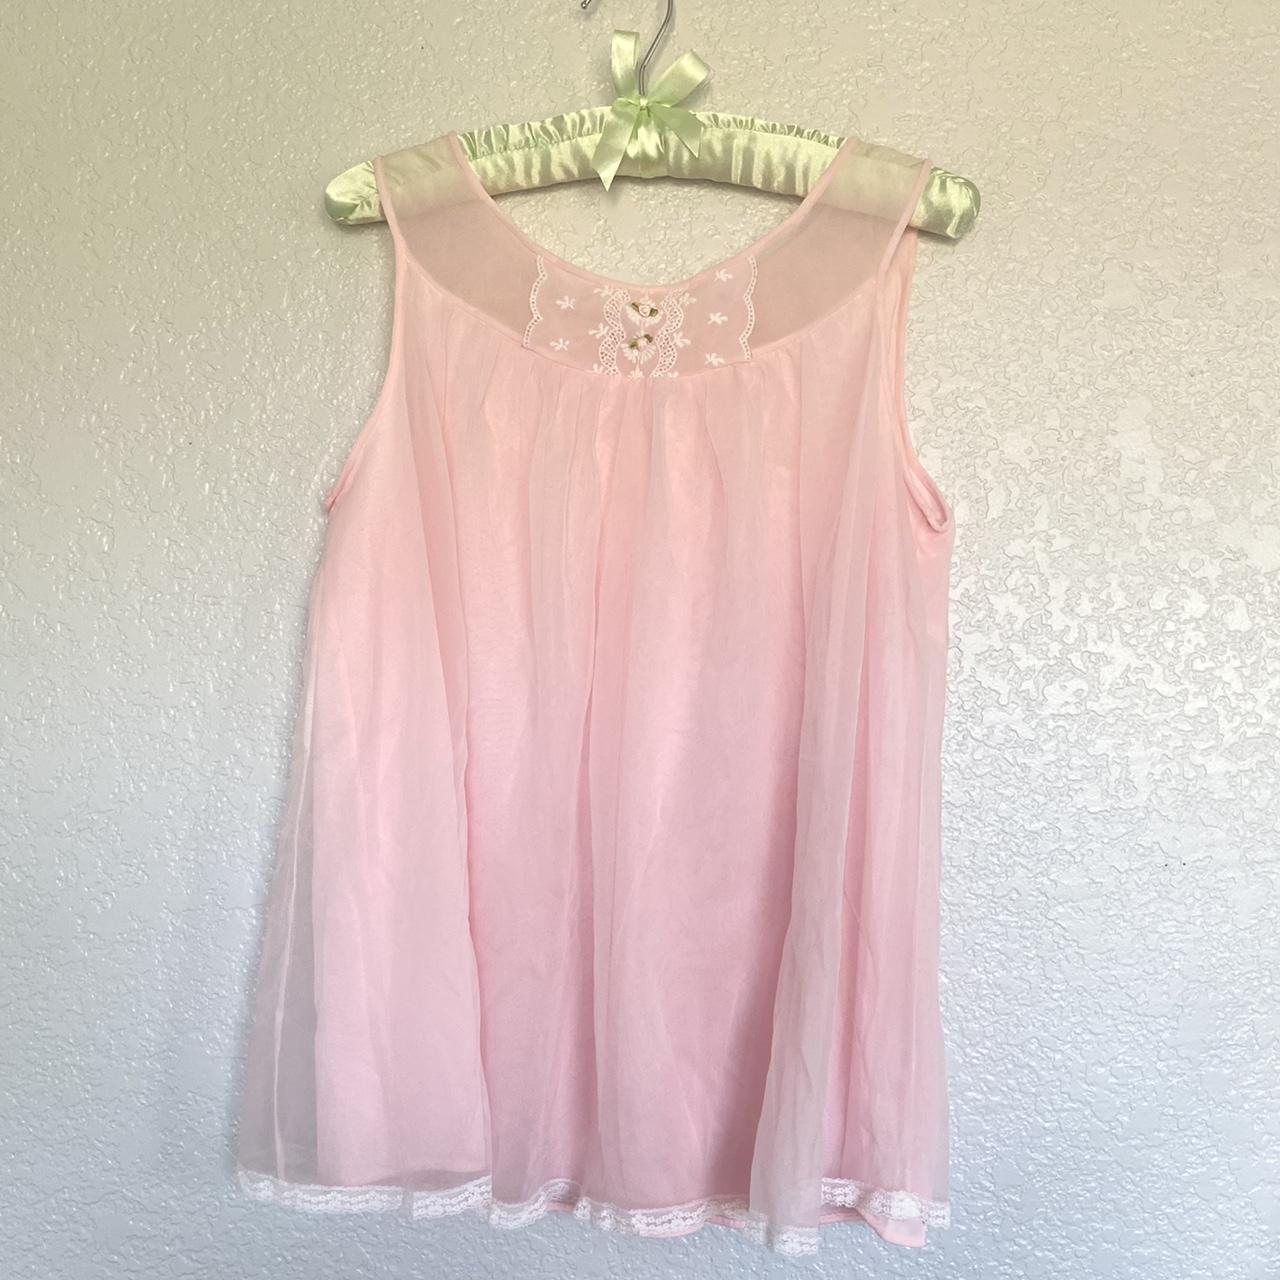 Product Image 1 - Reworked vintage baby pink blouse

This